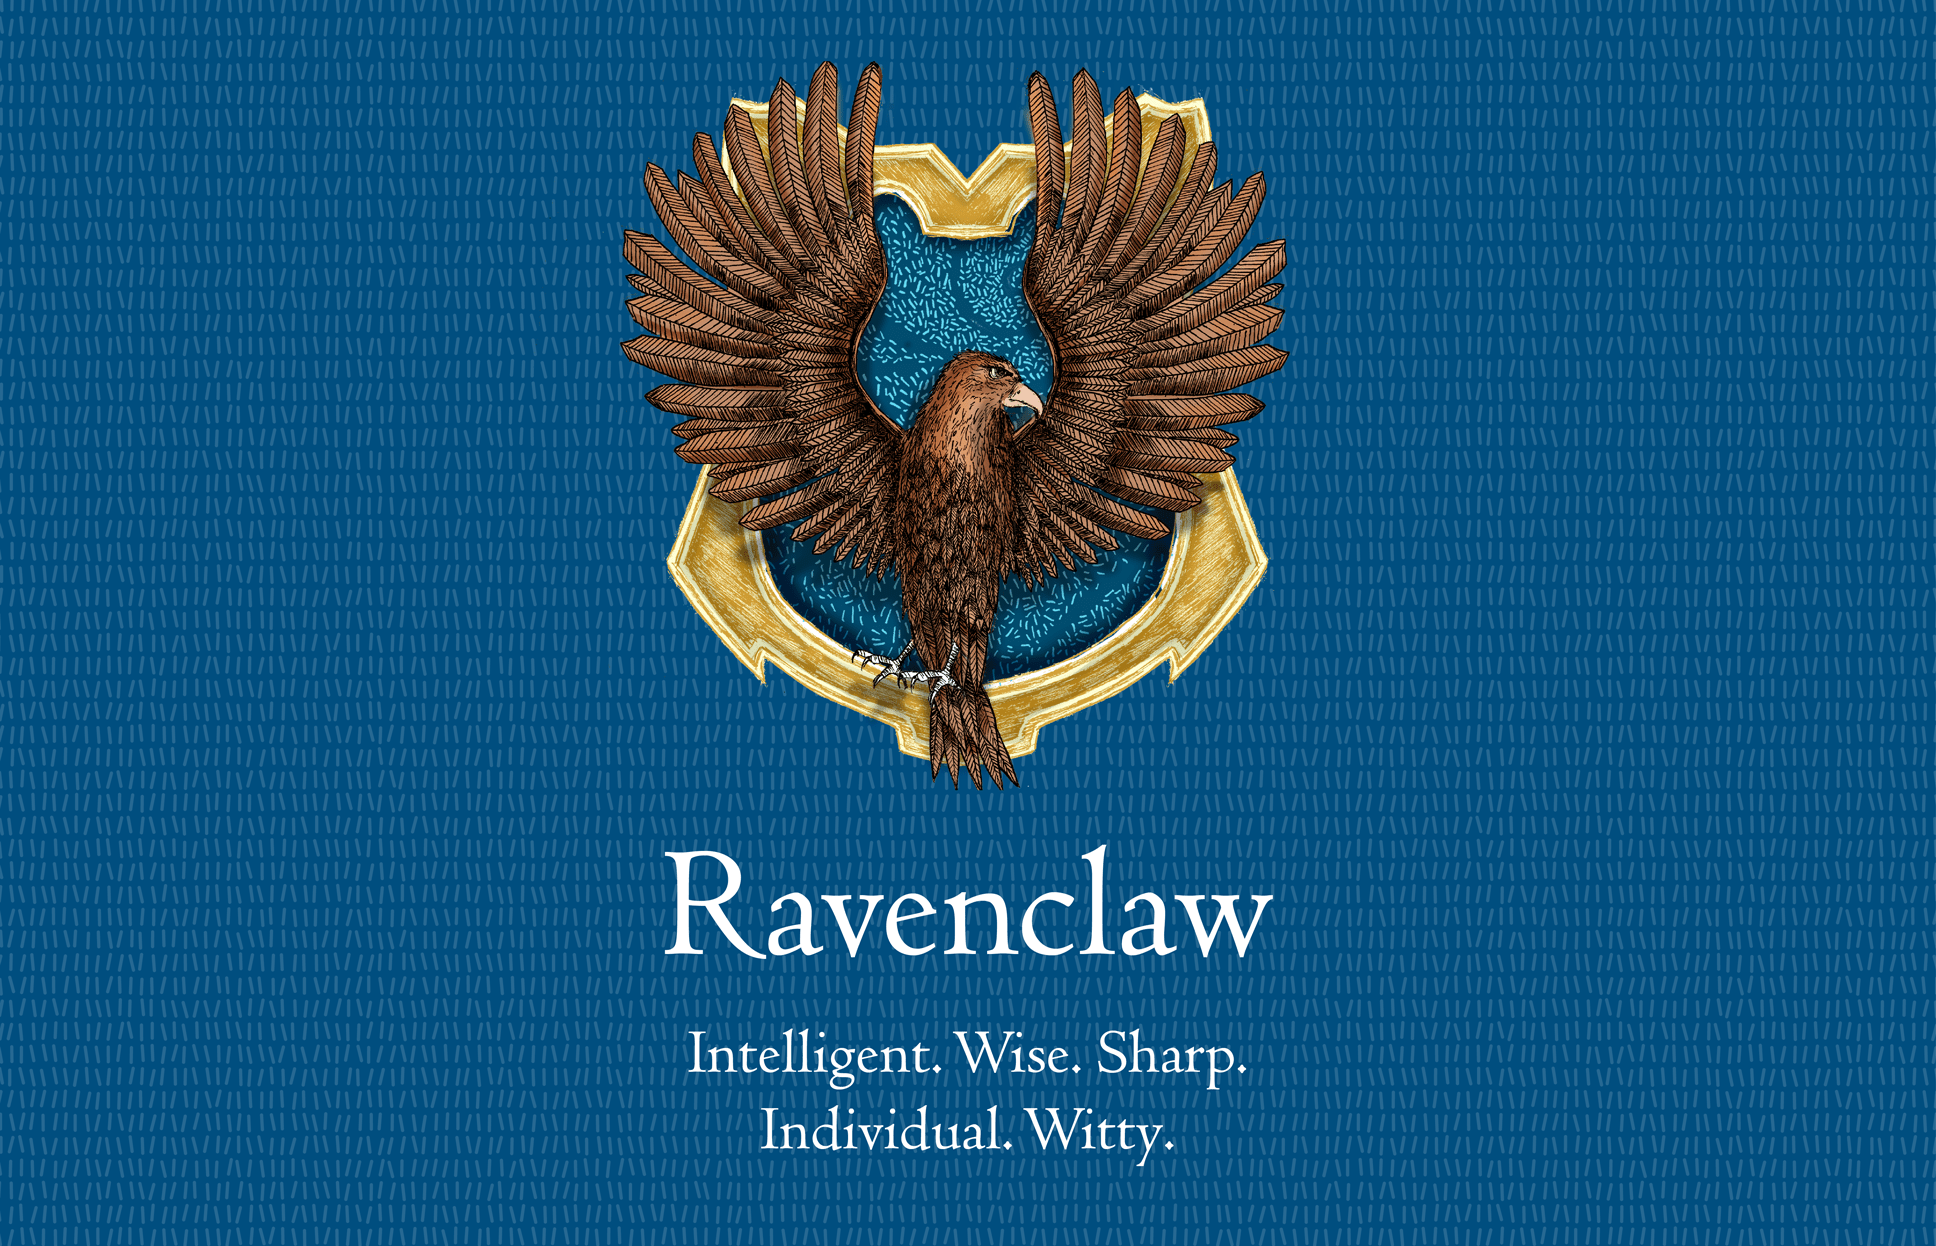 Harry Potter: Hogwarts Mystery on X: Rowena Ravenclaw selected her  students for their wisdom and intelligence. Fun Fact: Rowena's portrait has  been known to guest lecture at Hogwarts to this very day!